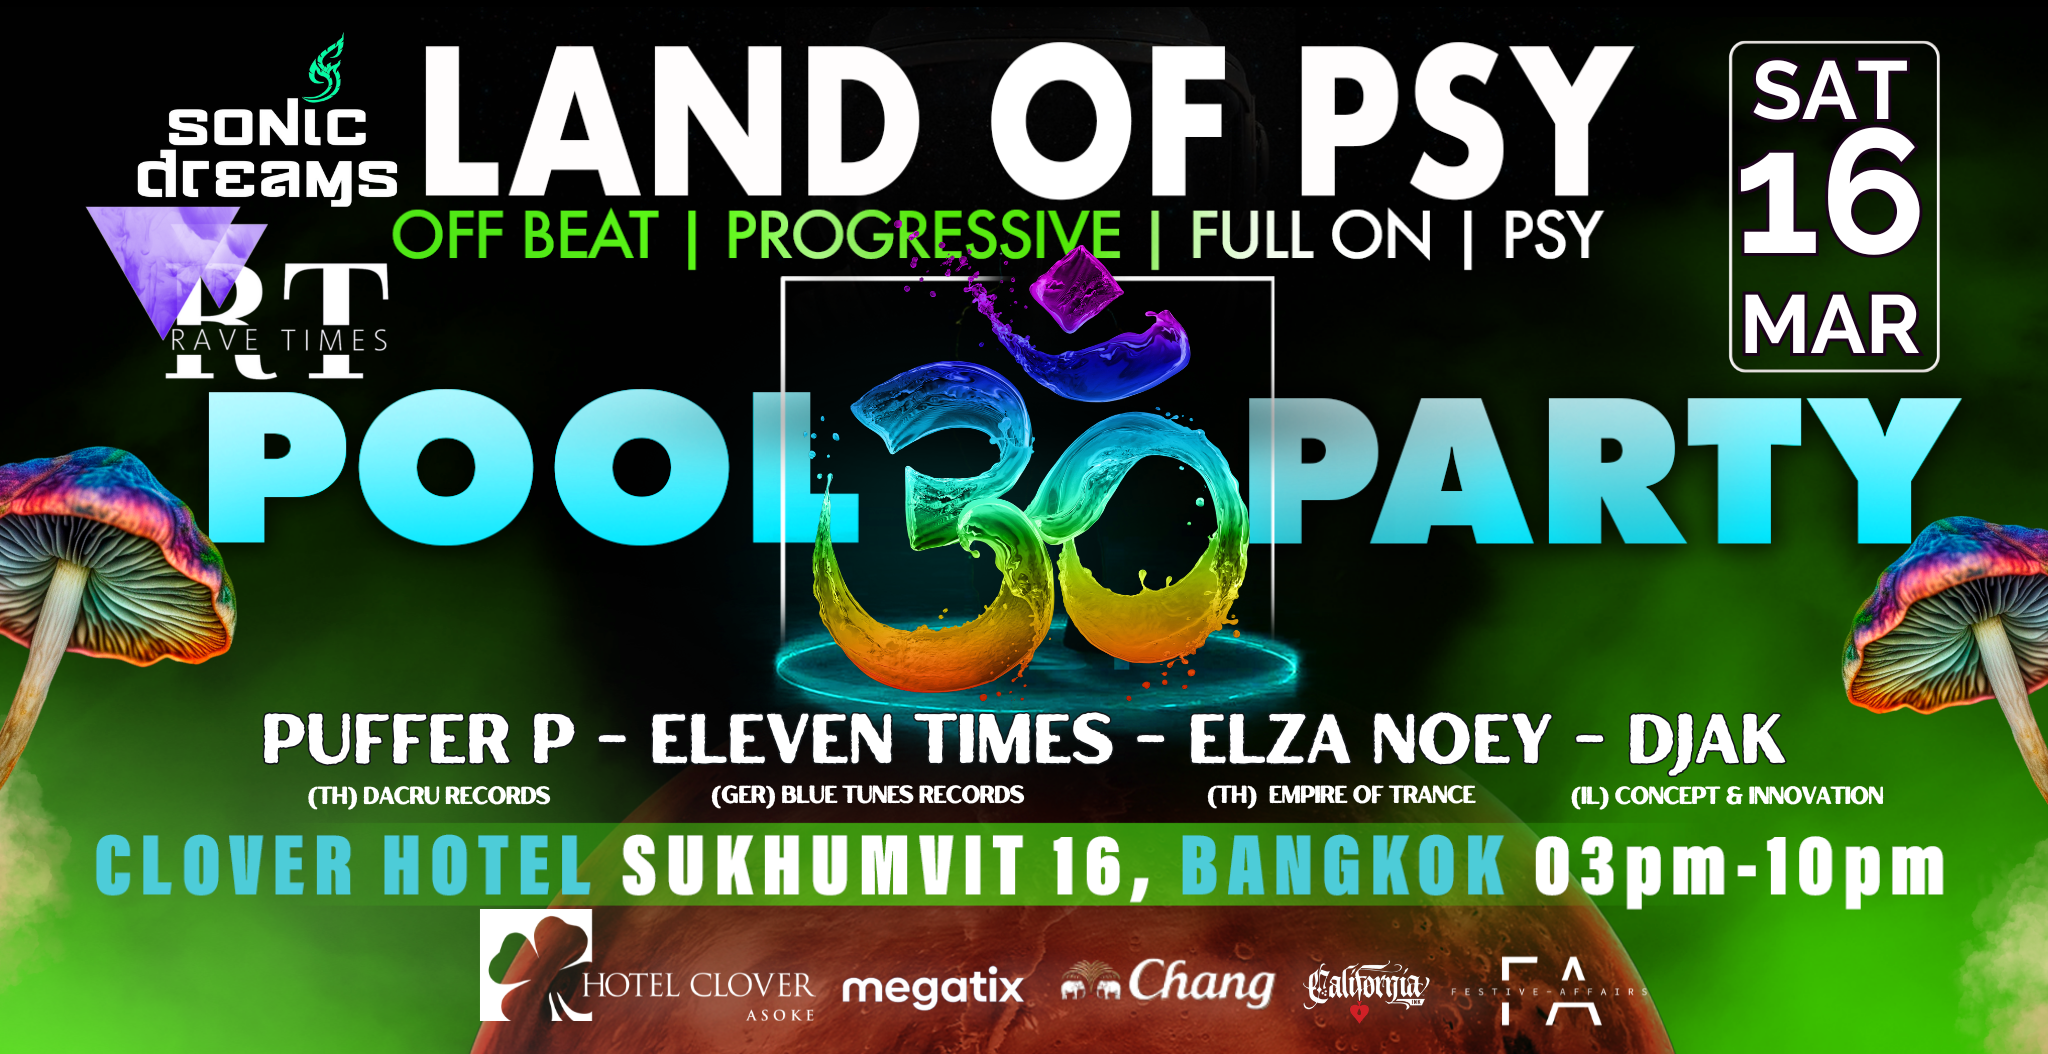 Land of PSY, Bangkok, POOL PARTY, by Rave Times (Hotel Clover Asoke) - フライヤー裏